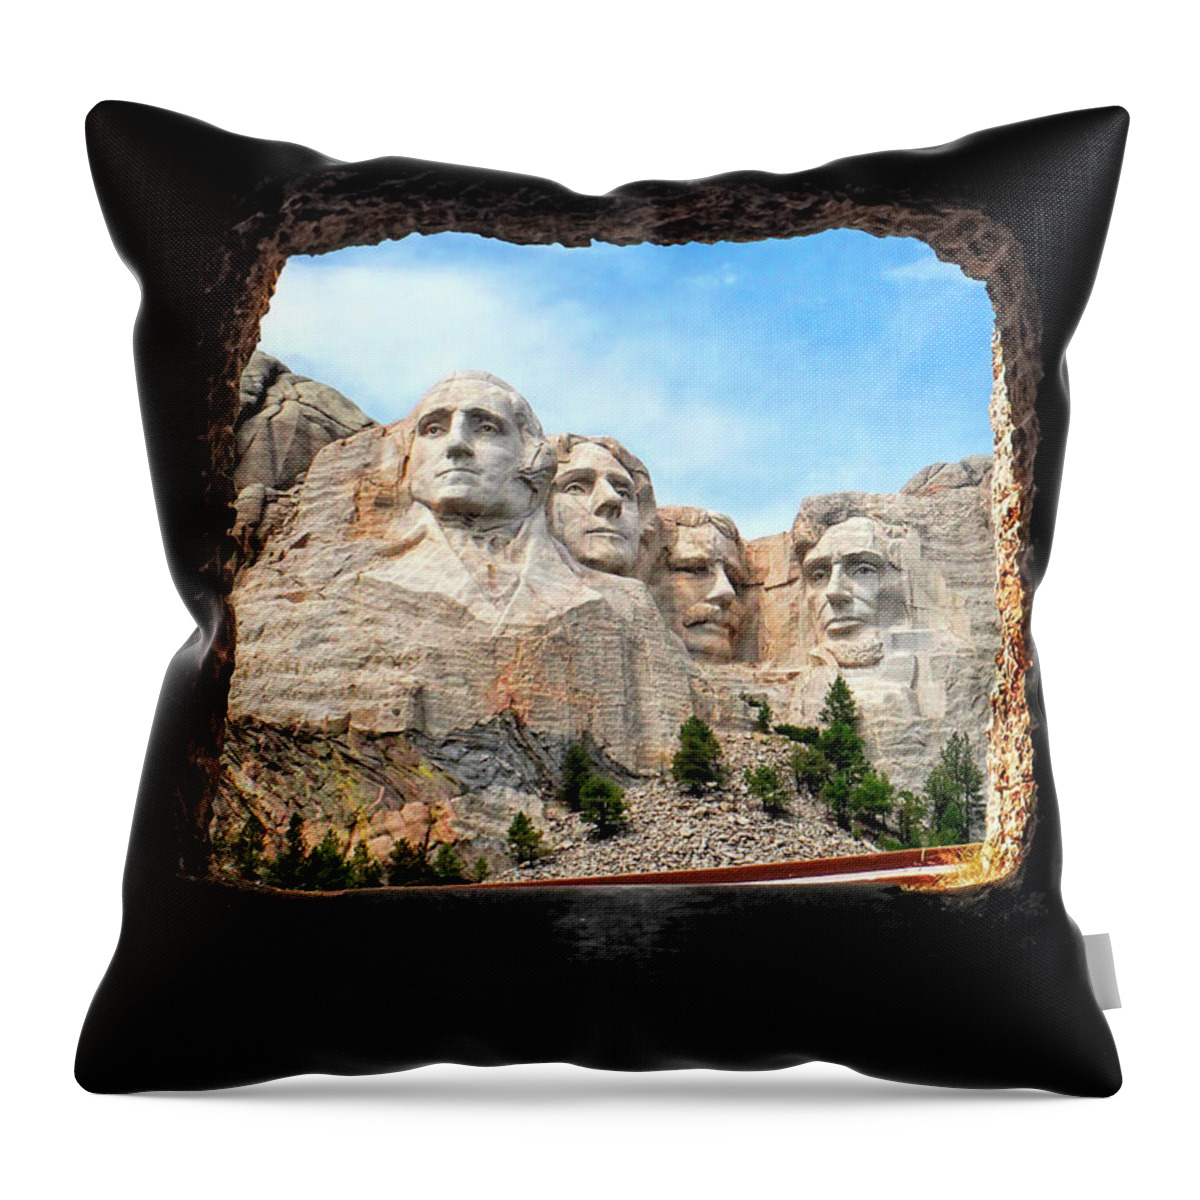 David Lawson Photography Throw Pillow featuring the photograph Mt Rushmore Tunnel by David Lawson